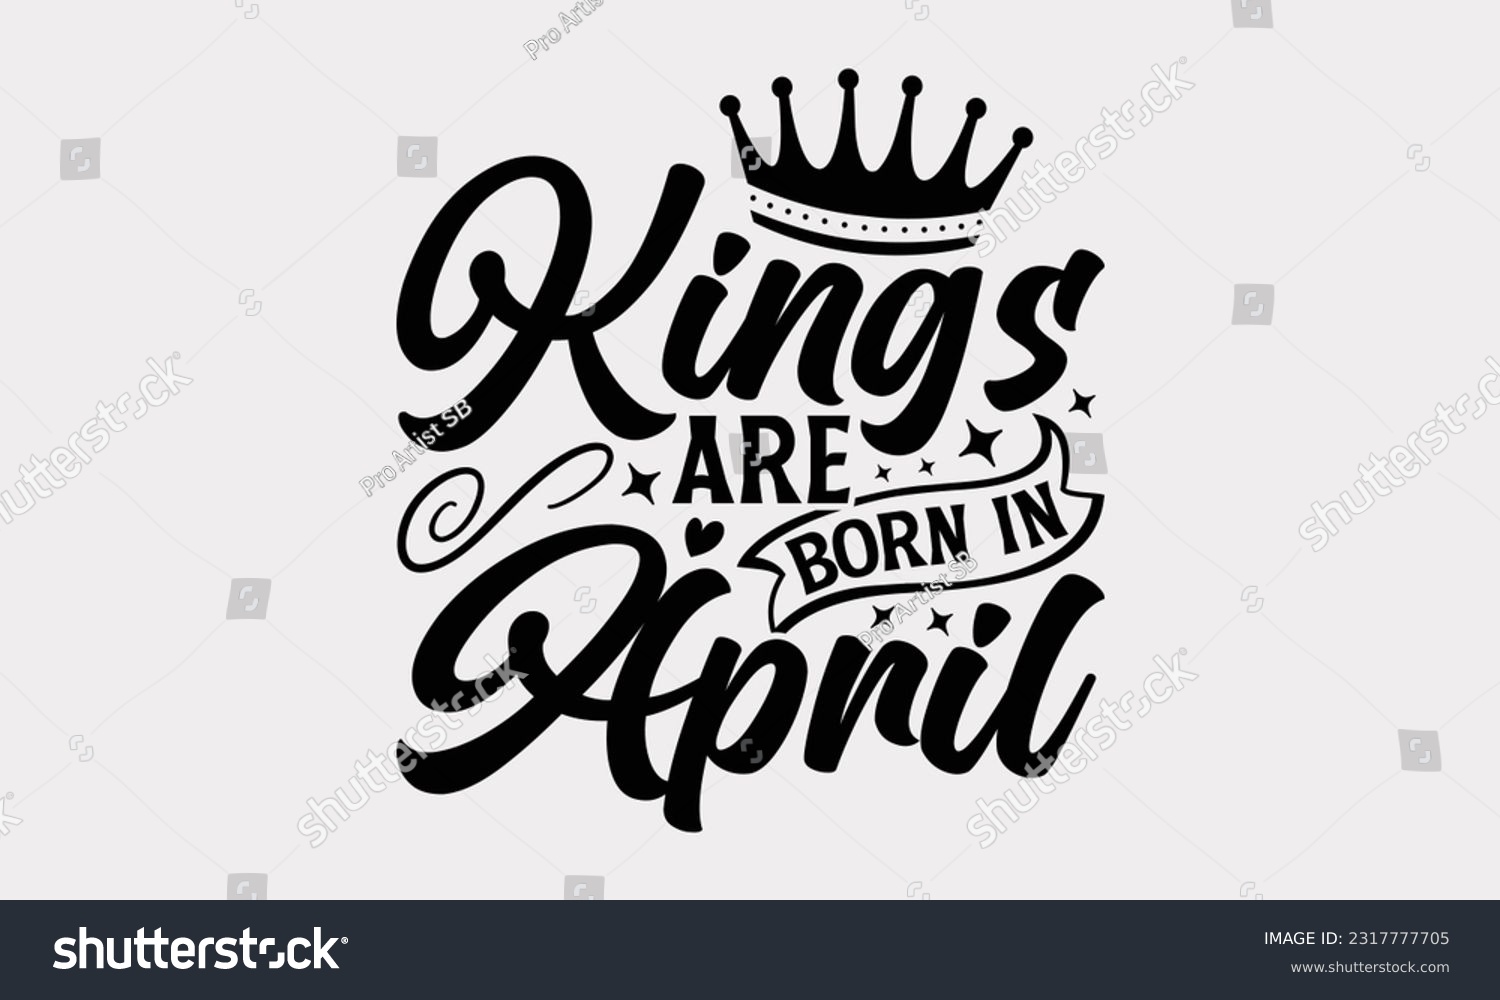 SVG of Kings Are Born In April - Birthday Month T-Shirt Design, Motivational Inspirational SVG Quotes, Hand Drawn Vintage Illustration With Hand-Lettering And Decoration Elements. svg